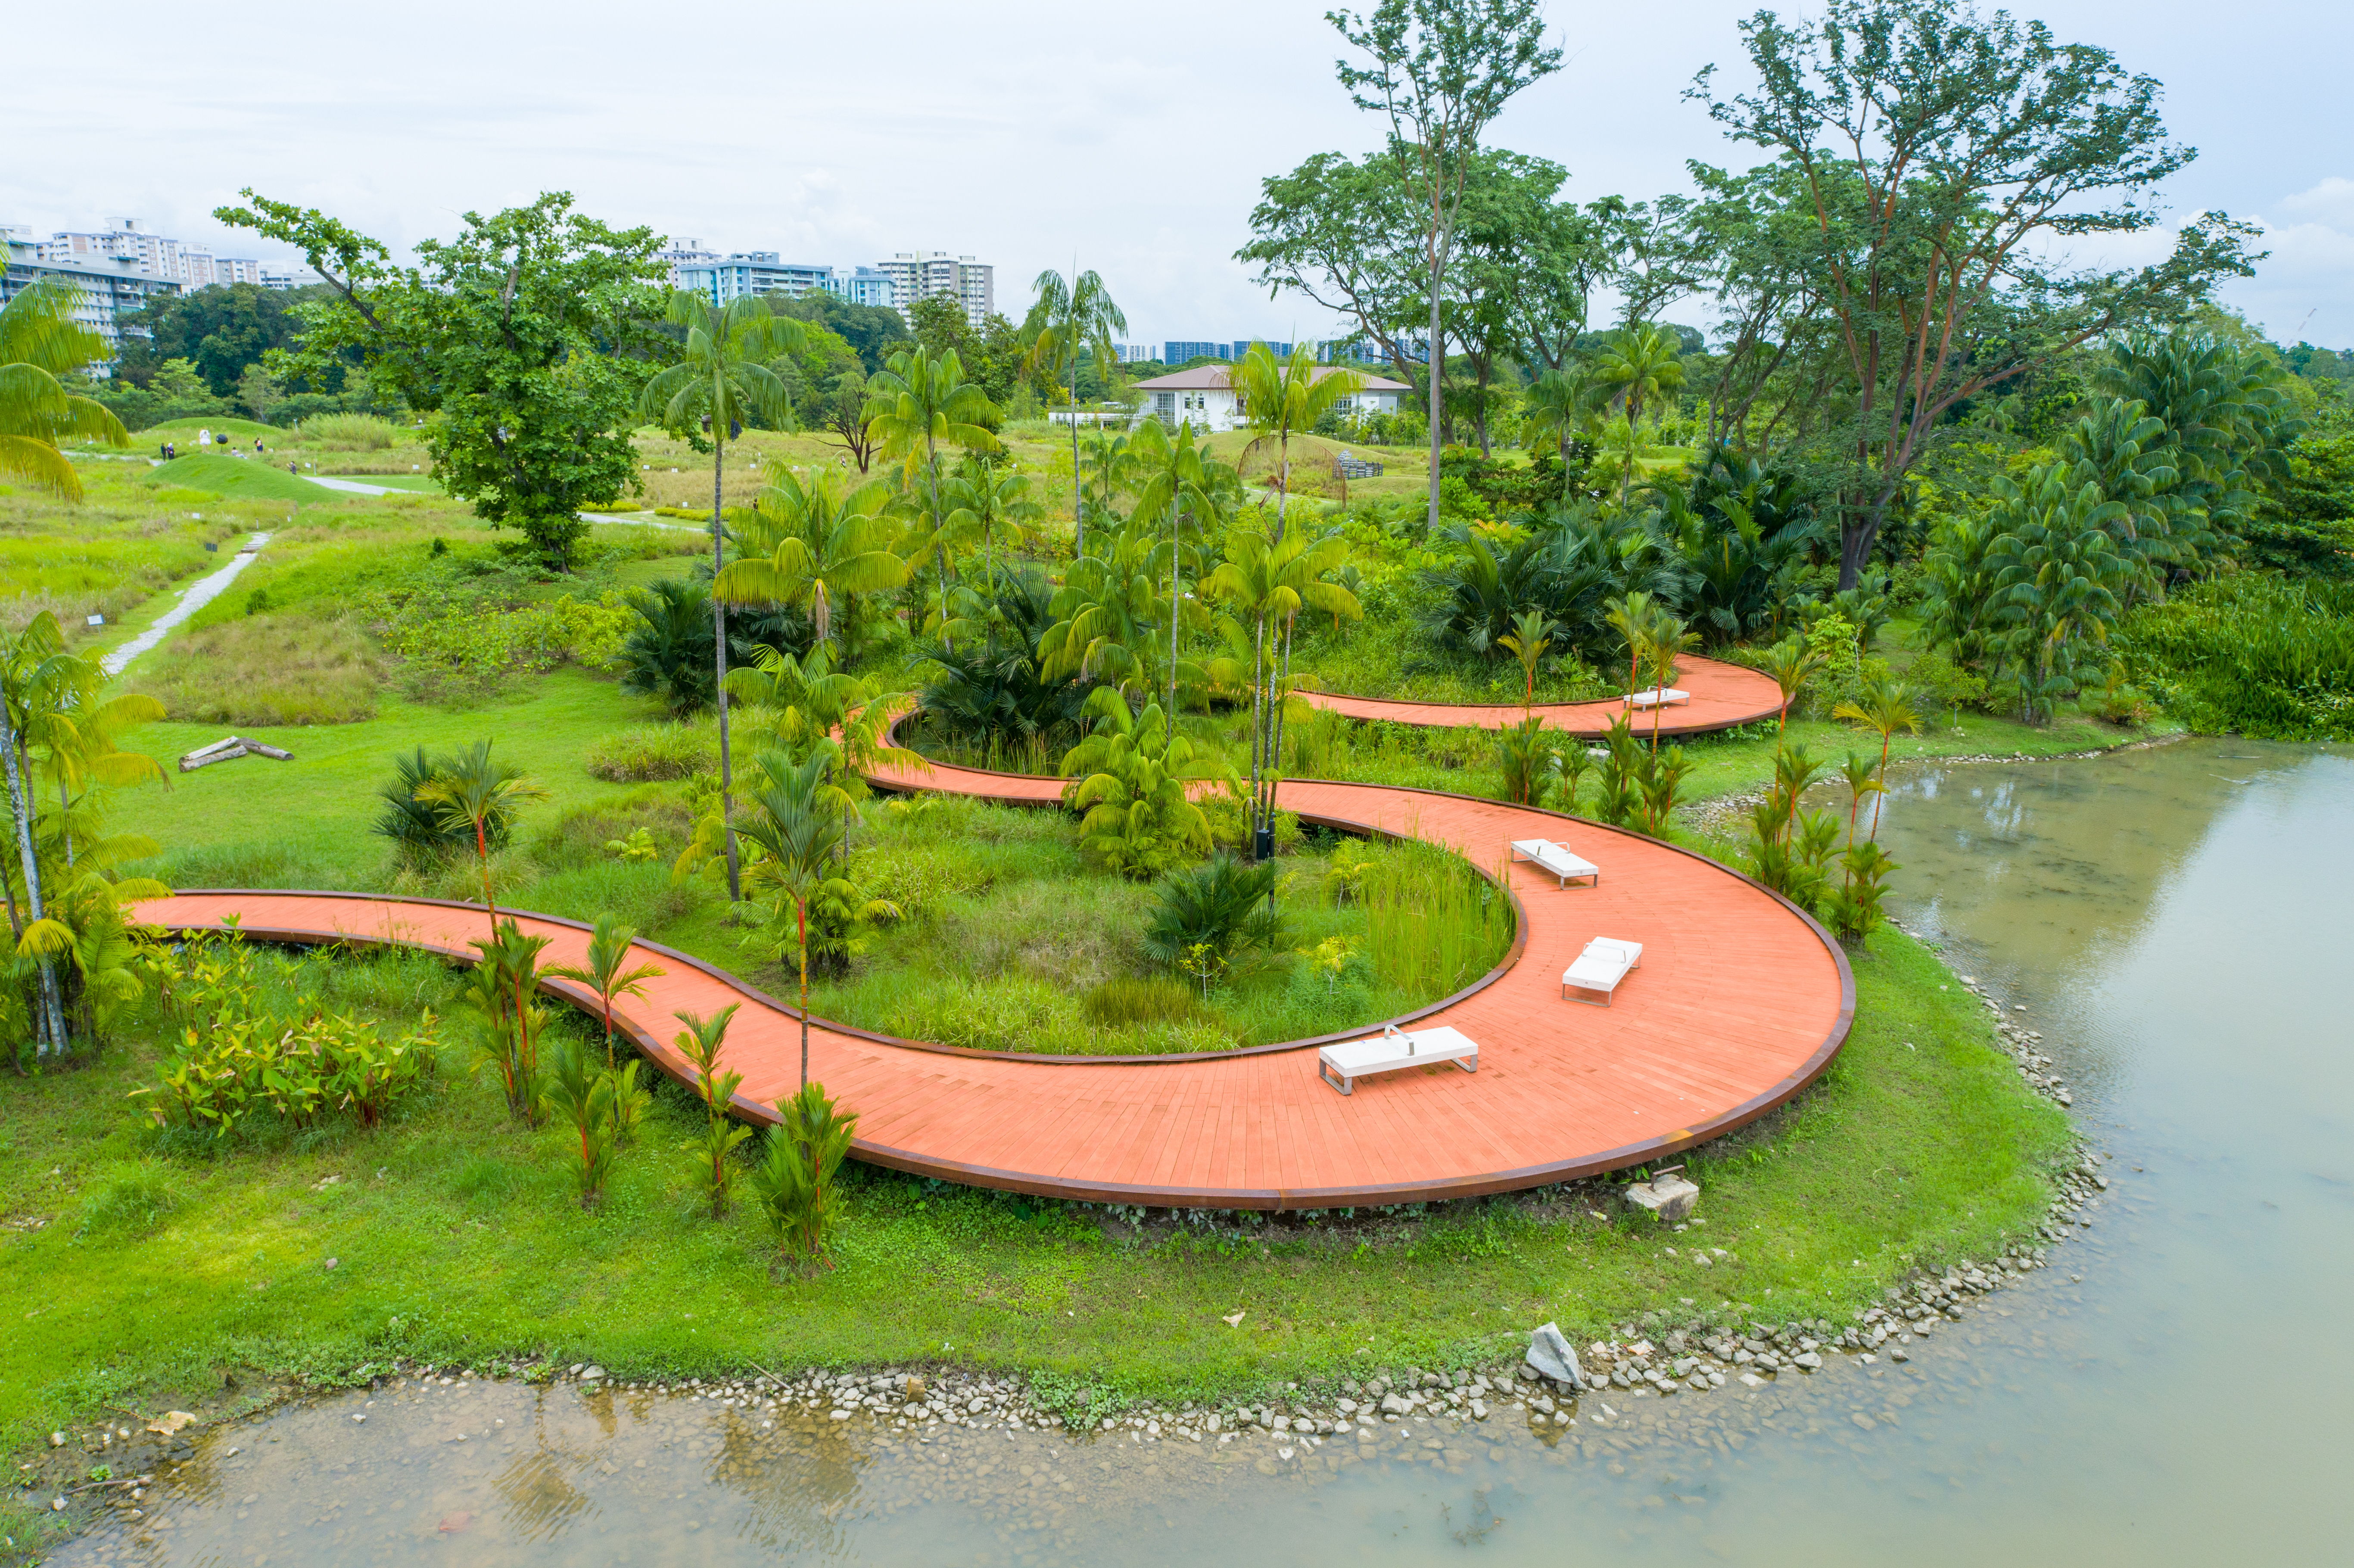 Lakeside Garden at Jurong Lake Gardens, designed by Ramboll Studio Dreiseitl and CPG Consultants. ​ Image licensed by Ramboll Studio Dreiseitl © 2021 Aerial Photography